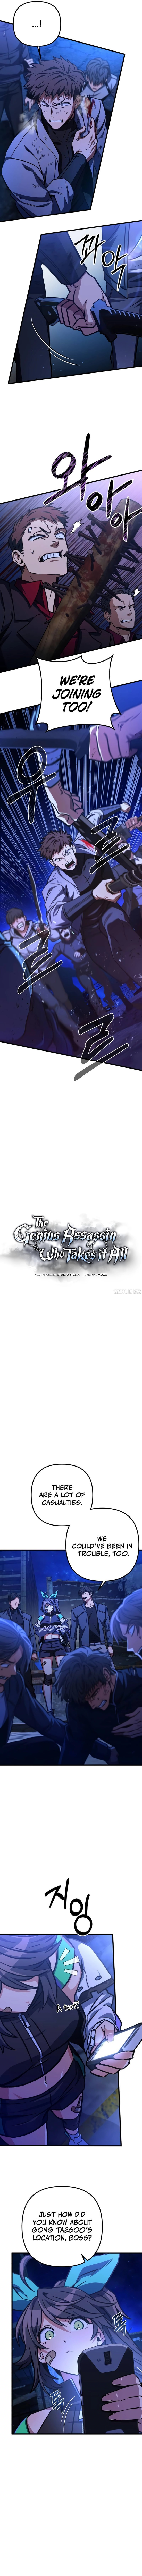 the-genius-assassin-who-takes-it-all-chap-25-11